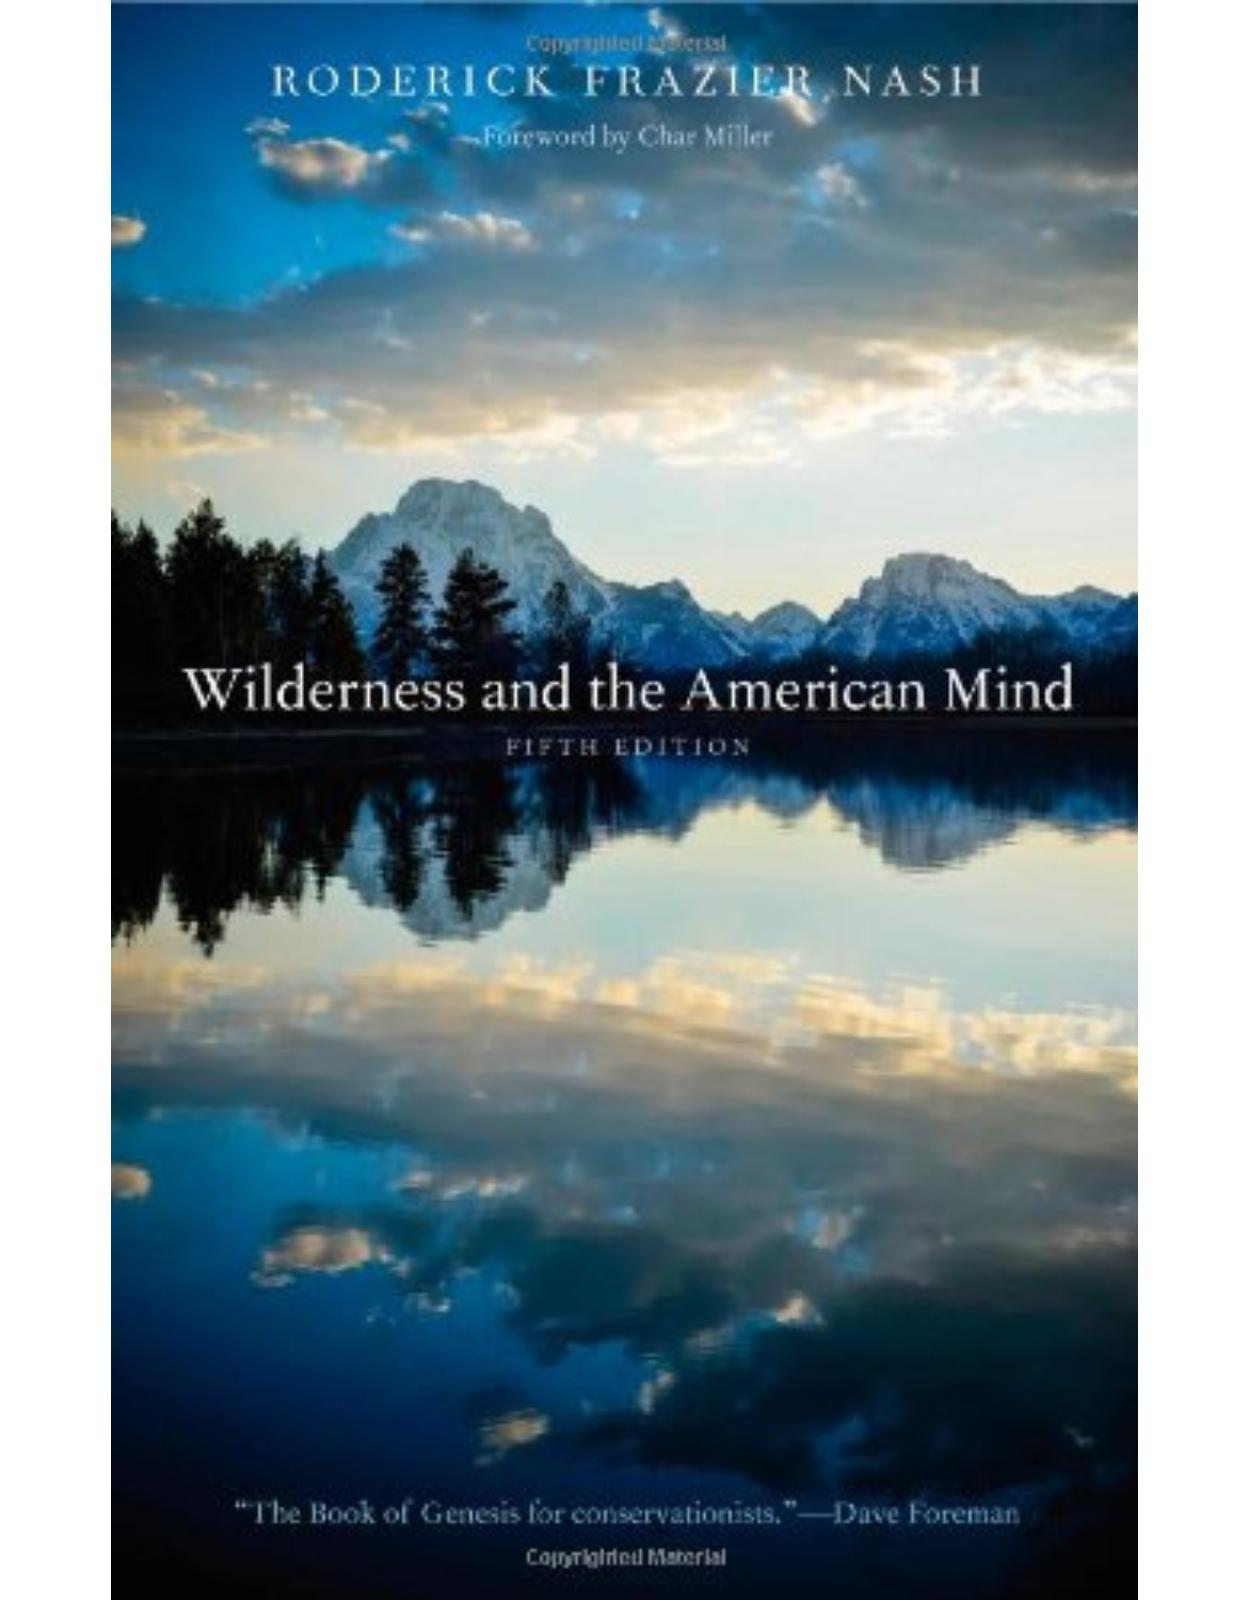 Wilderness and the American Mind.